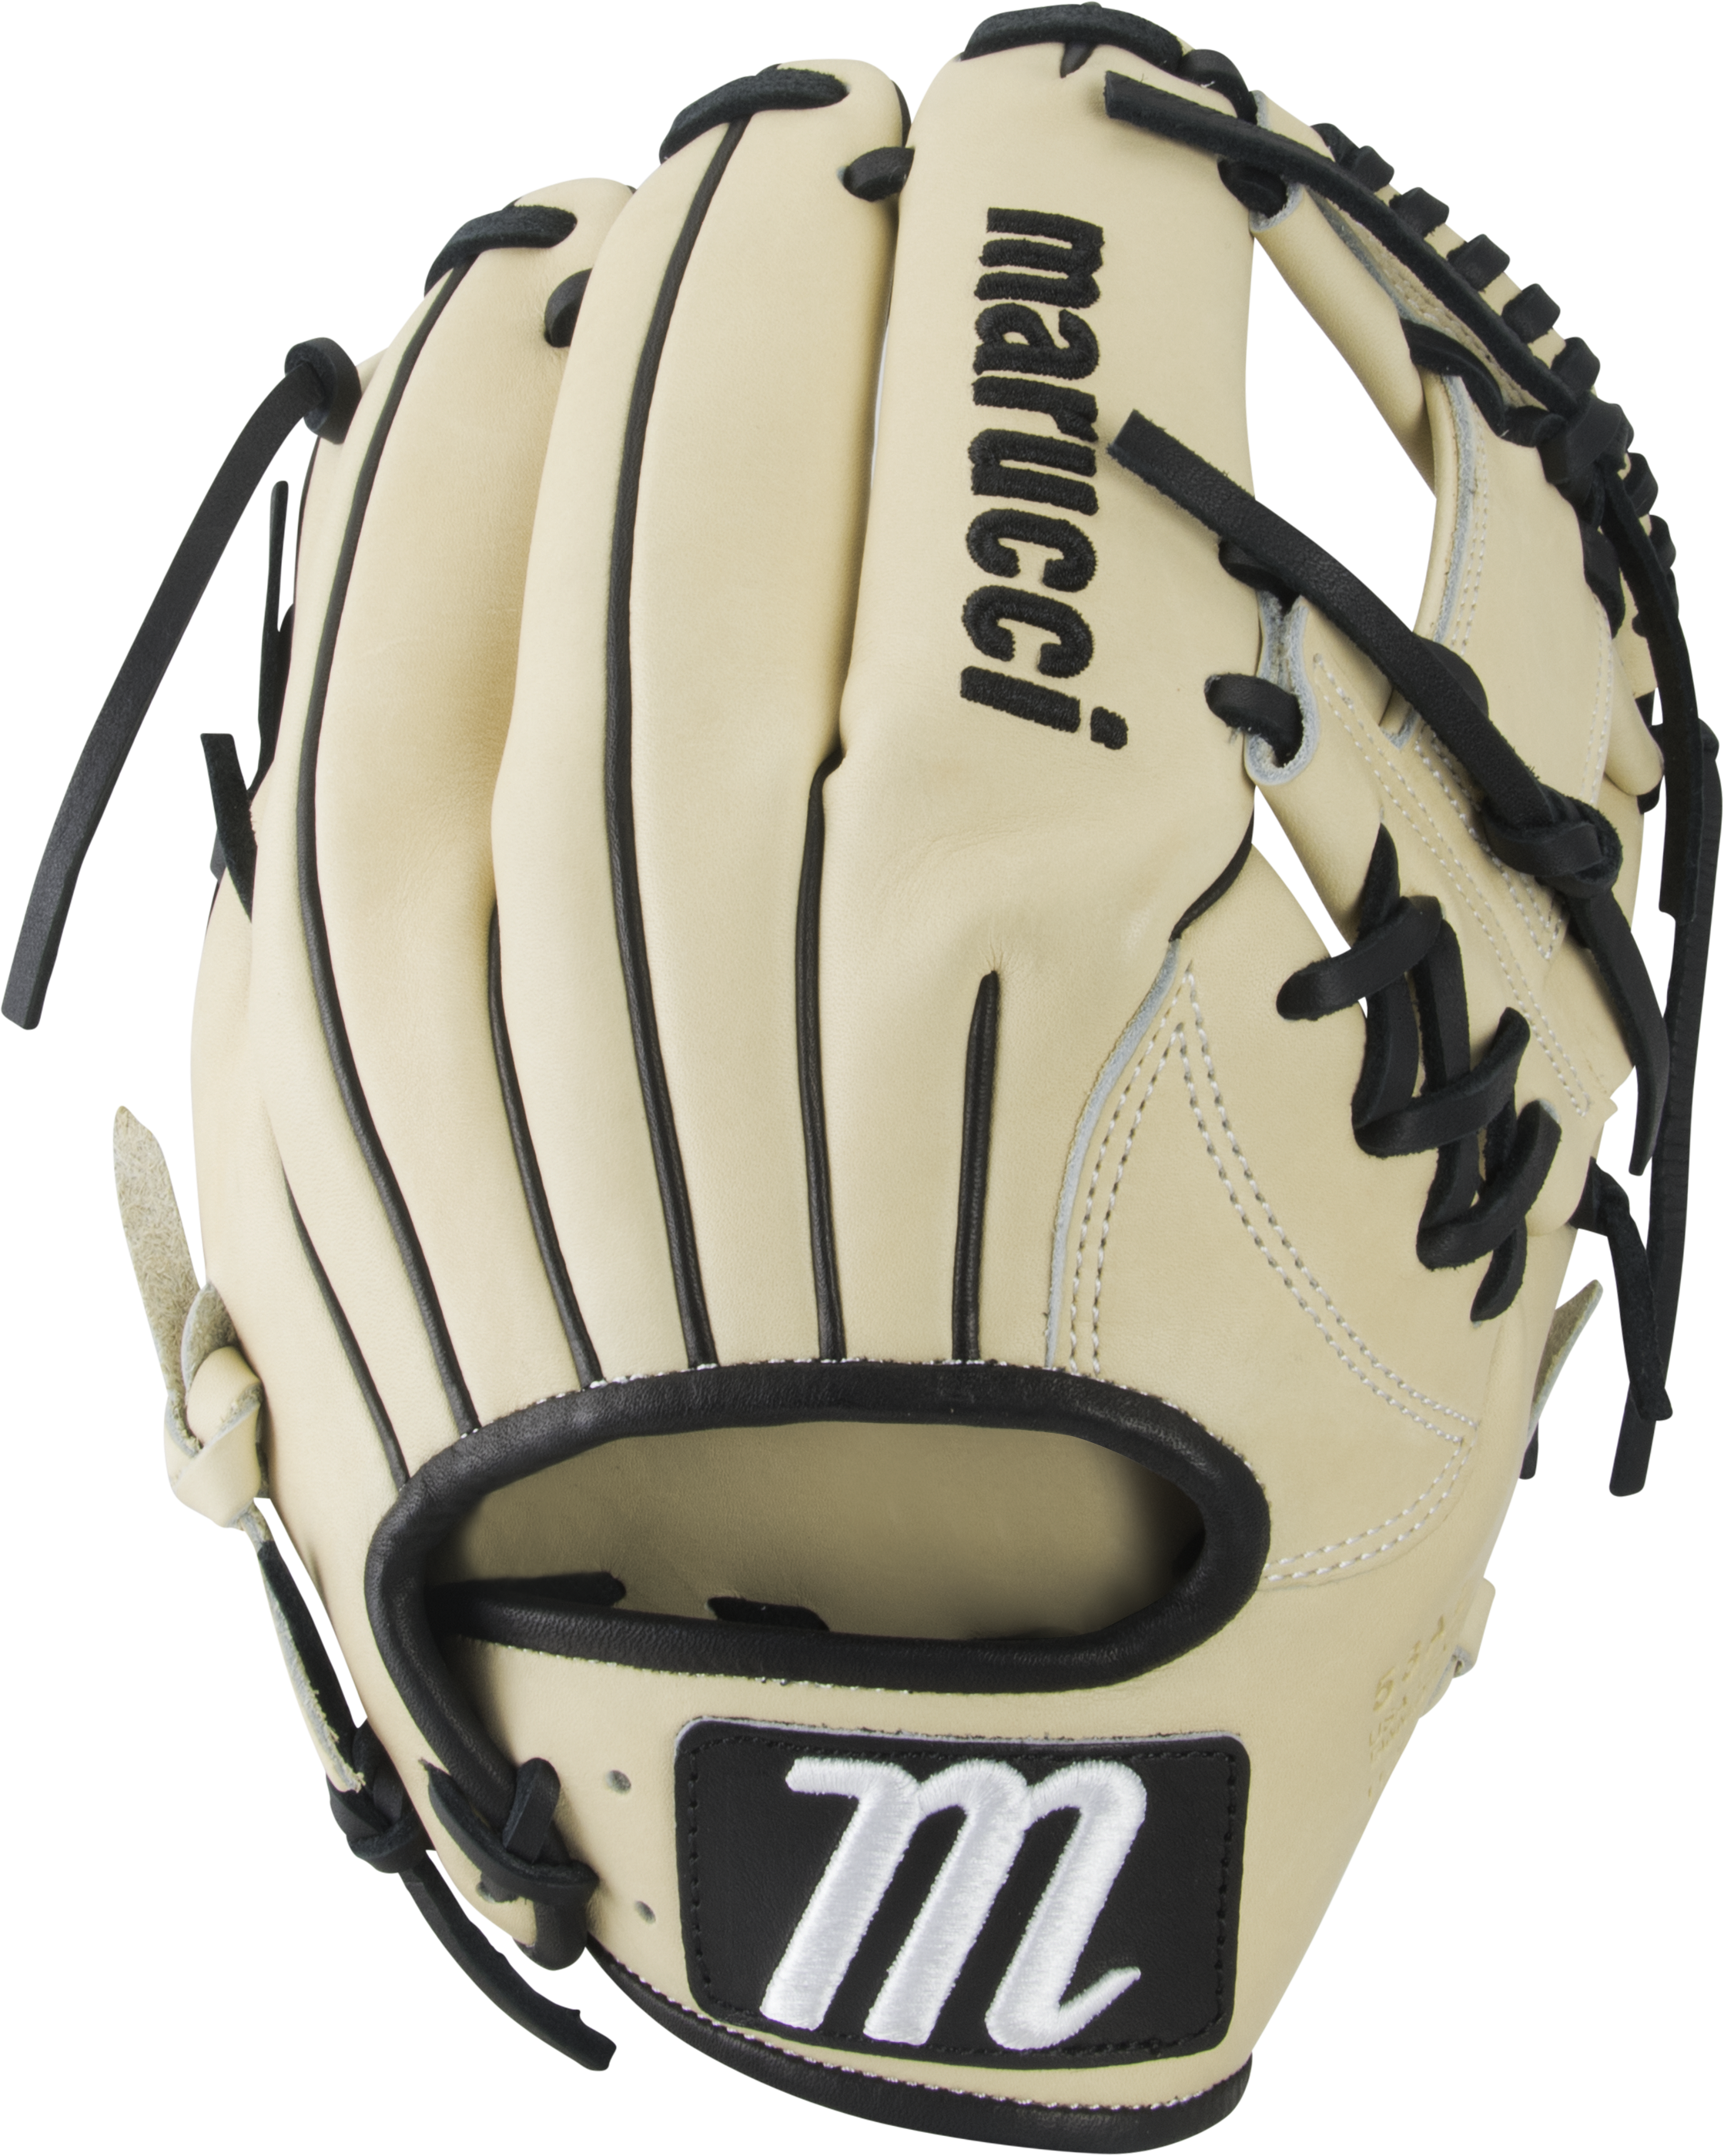 marucci-capitol-11-5-baseball-glove-53a2-i-web-right-hand-throw MFGCP53A2-CMBK-RightHandThrow Marucci  849817099193 Premium Japanese-tanned USA Kip leather combines ideal stiffness with lightweight feel